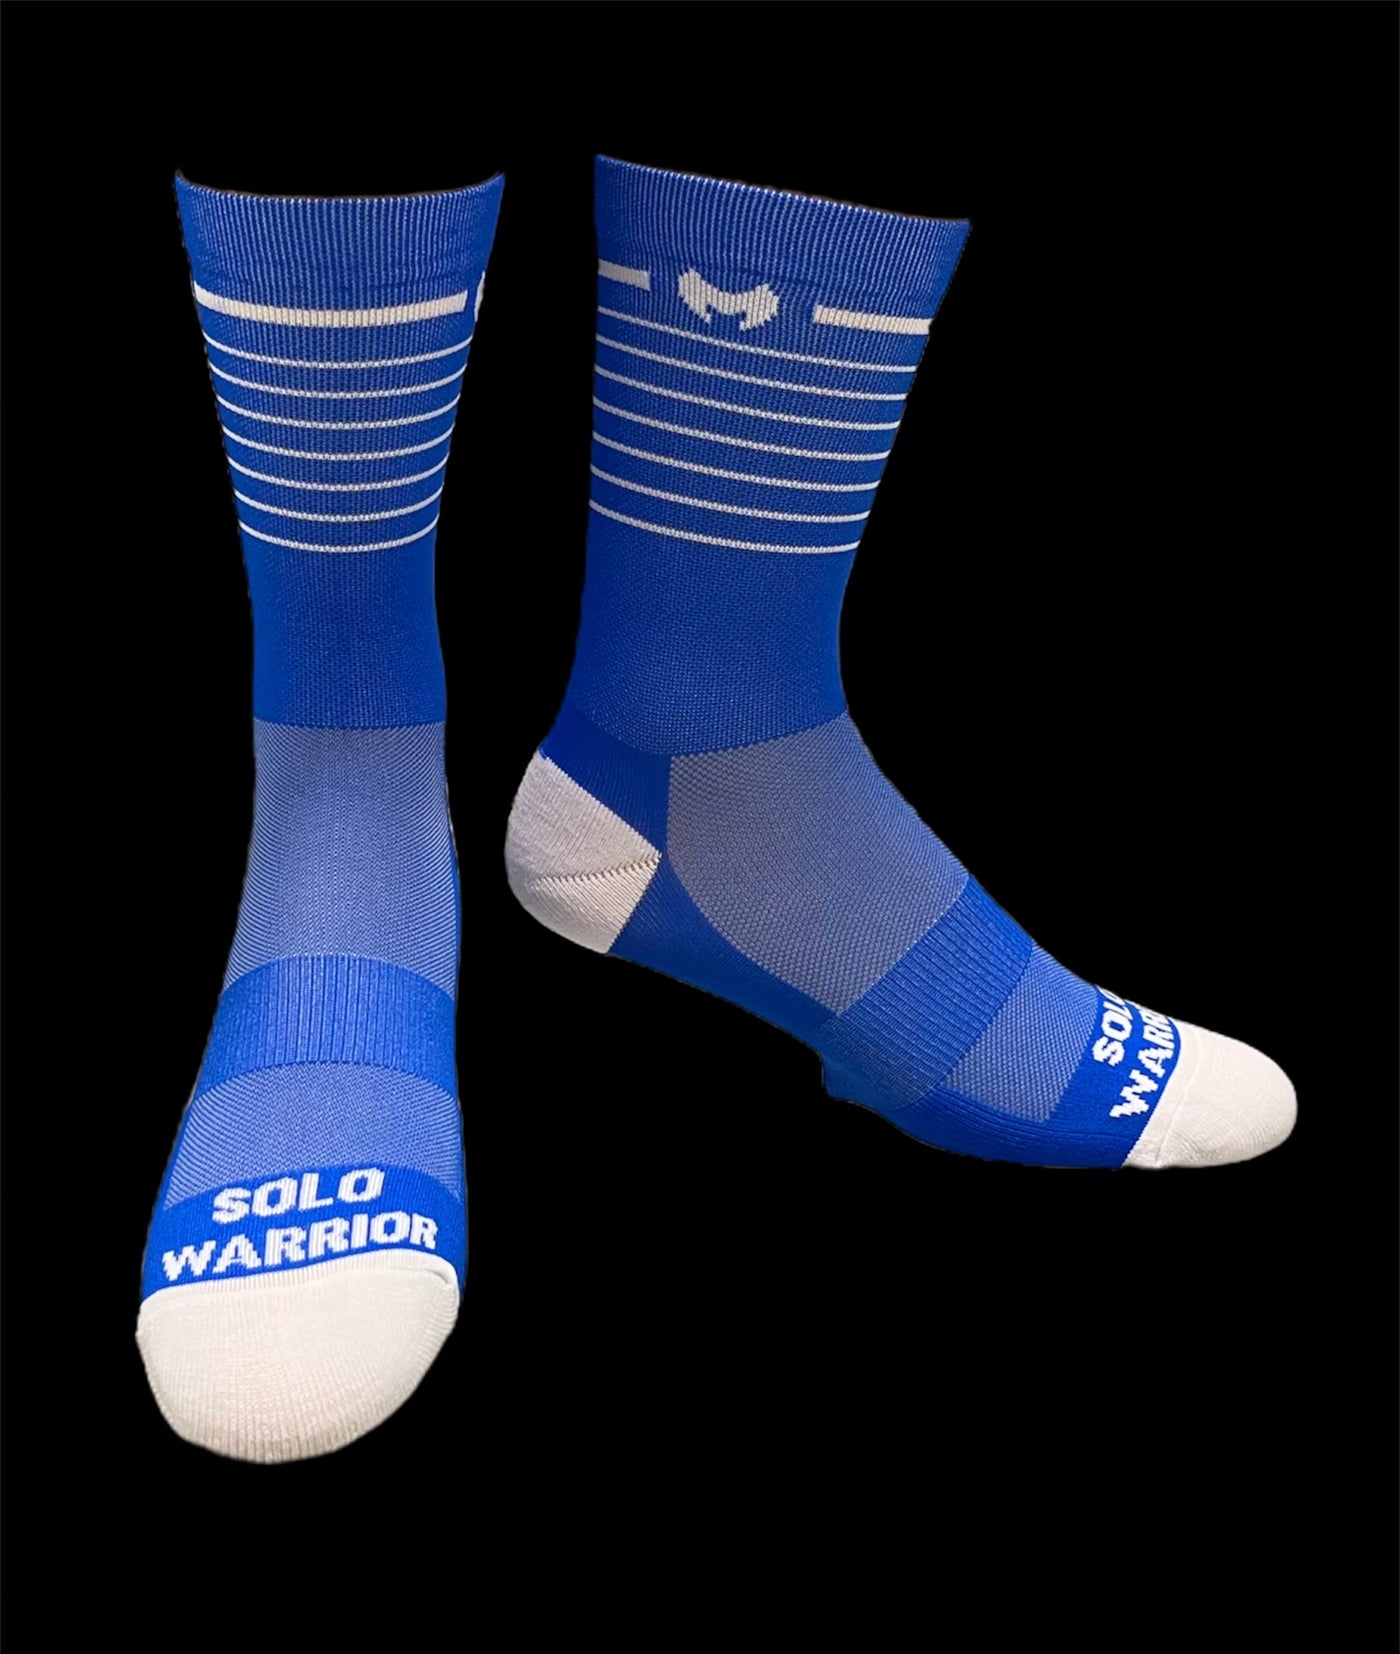 Classic blue and white striped 6" Men's and Women's cycling sock with compression.